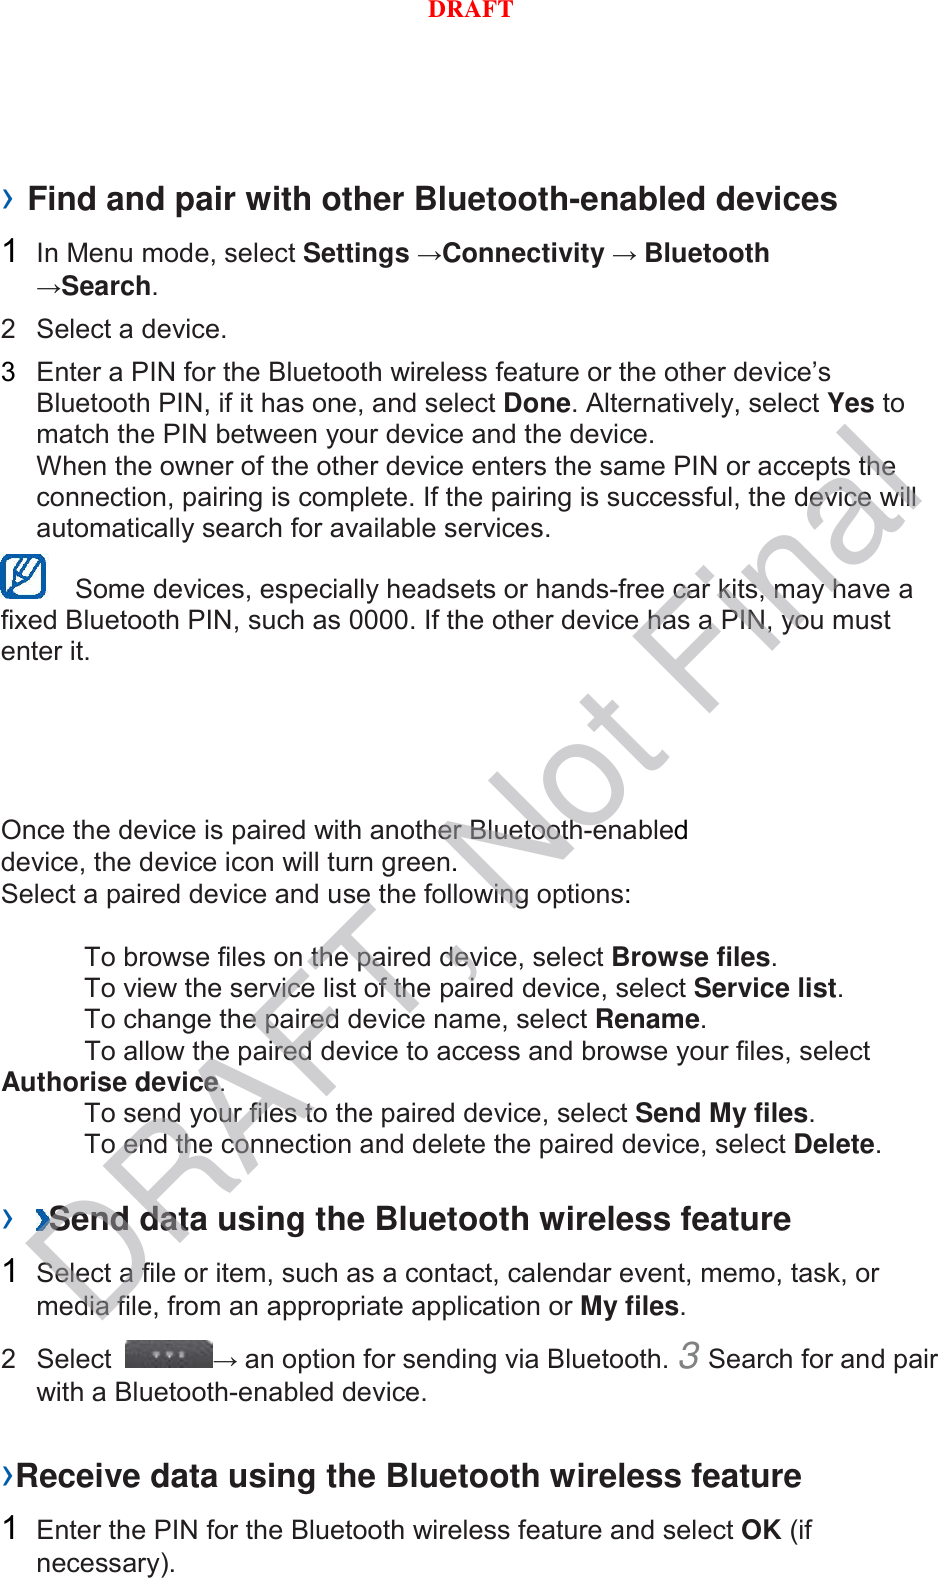 › Find and pair with other Bluetooth-enabled devices   1  In Menu mode, select Settings →Connectivity → Bluetooth →Search.   2  Select a device.   3  Enter a PIN for the Bluetooth wireless feature or the other device’s Bluetooth PIN, if it has one, and select Done. Alternatively, select Yes to match the PIN between your device and the device.   When the owner of the other device enters the same PIN or accepts the connection, pairing is complete. If the pairing is successful, the device will automatically search for available services.    Some devices, especially headsets or hands-free car kits, may have a fixed Bluetooth PIN, such as 0000. If the other device has a PIN, you must enter it.   Once the device is paired with another Bluetooth-enabled device, the device icon will turn green. Select a paired device and use the following options:    To browse files on the paired device, select Browse files.    To view the service list of the paired device, select Service list.    To change the paired device name, select Rename.    To allow the paired device to access and browse your files, select Authorise device.    To send your files to the paired device, select Send My files.    To end the connection and delete the paired device, select Delete.    ›  Send data using the Bluetooth wireless feature   1  Select a file or item, such as a contact, calendar event, memo, task, or media file, from an appropriate application or My files.   2  Select  → an option for sending via Bluetooth. 3 Search for and pair with a Bluetooth-enabled device.   ›Receive data using the Bluetooth wireless feature   1  Enter the PIN for the Bluetooth wireless feature and select OK (if necessary).   DRAFT, Not FinalDRAFT